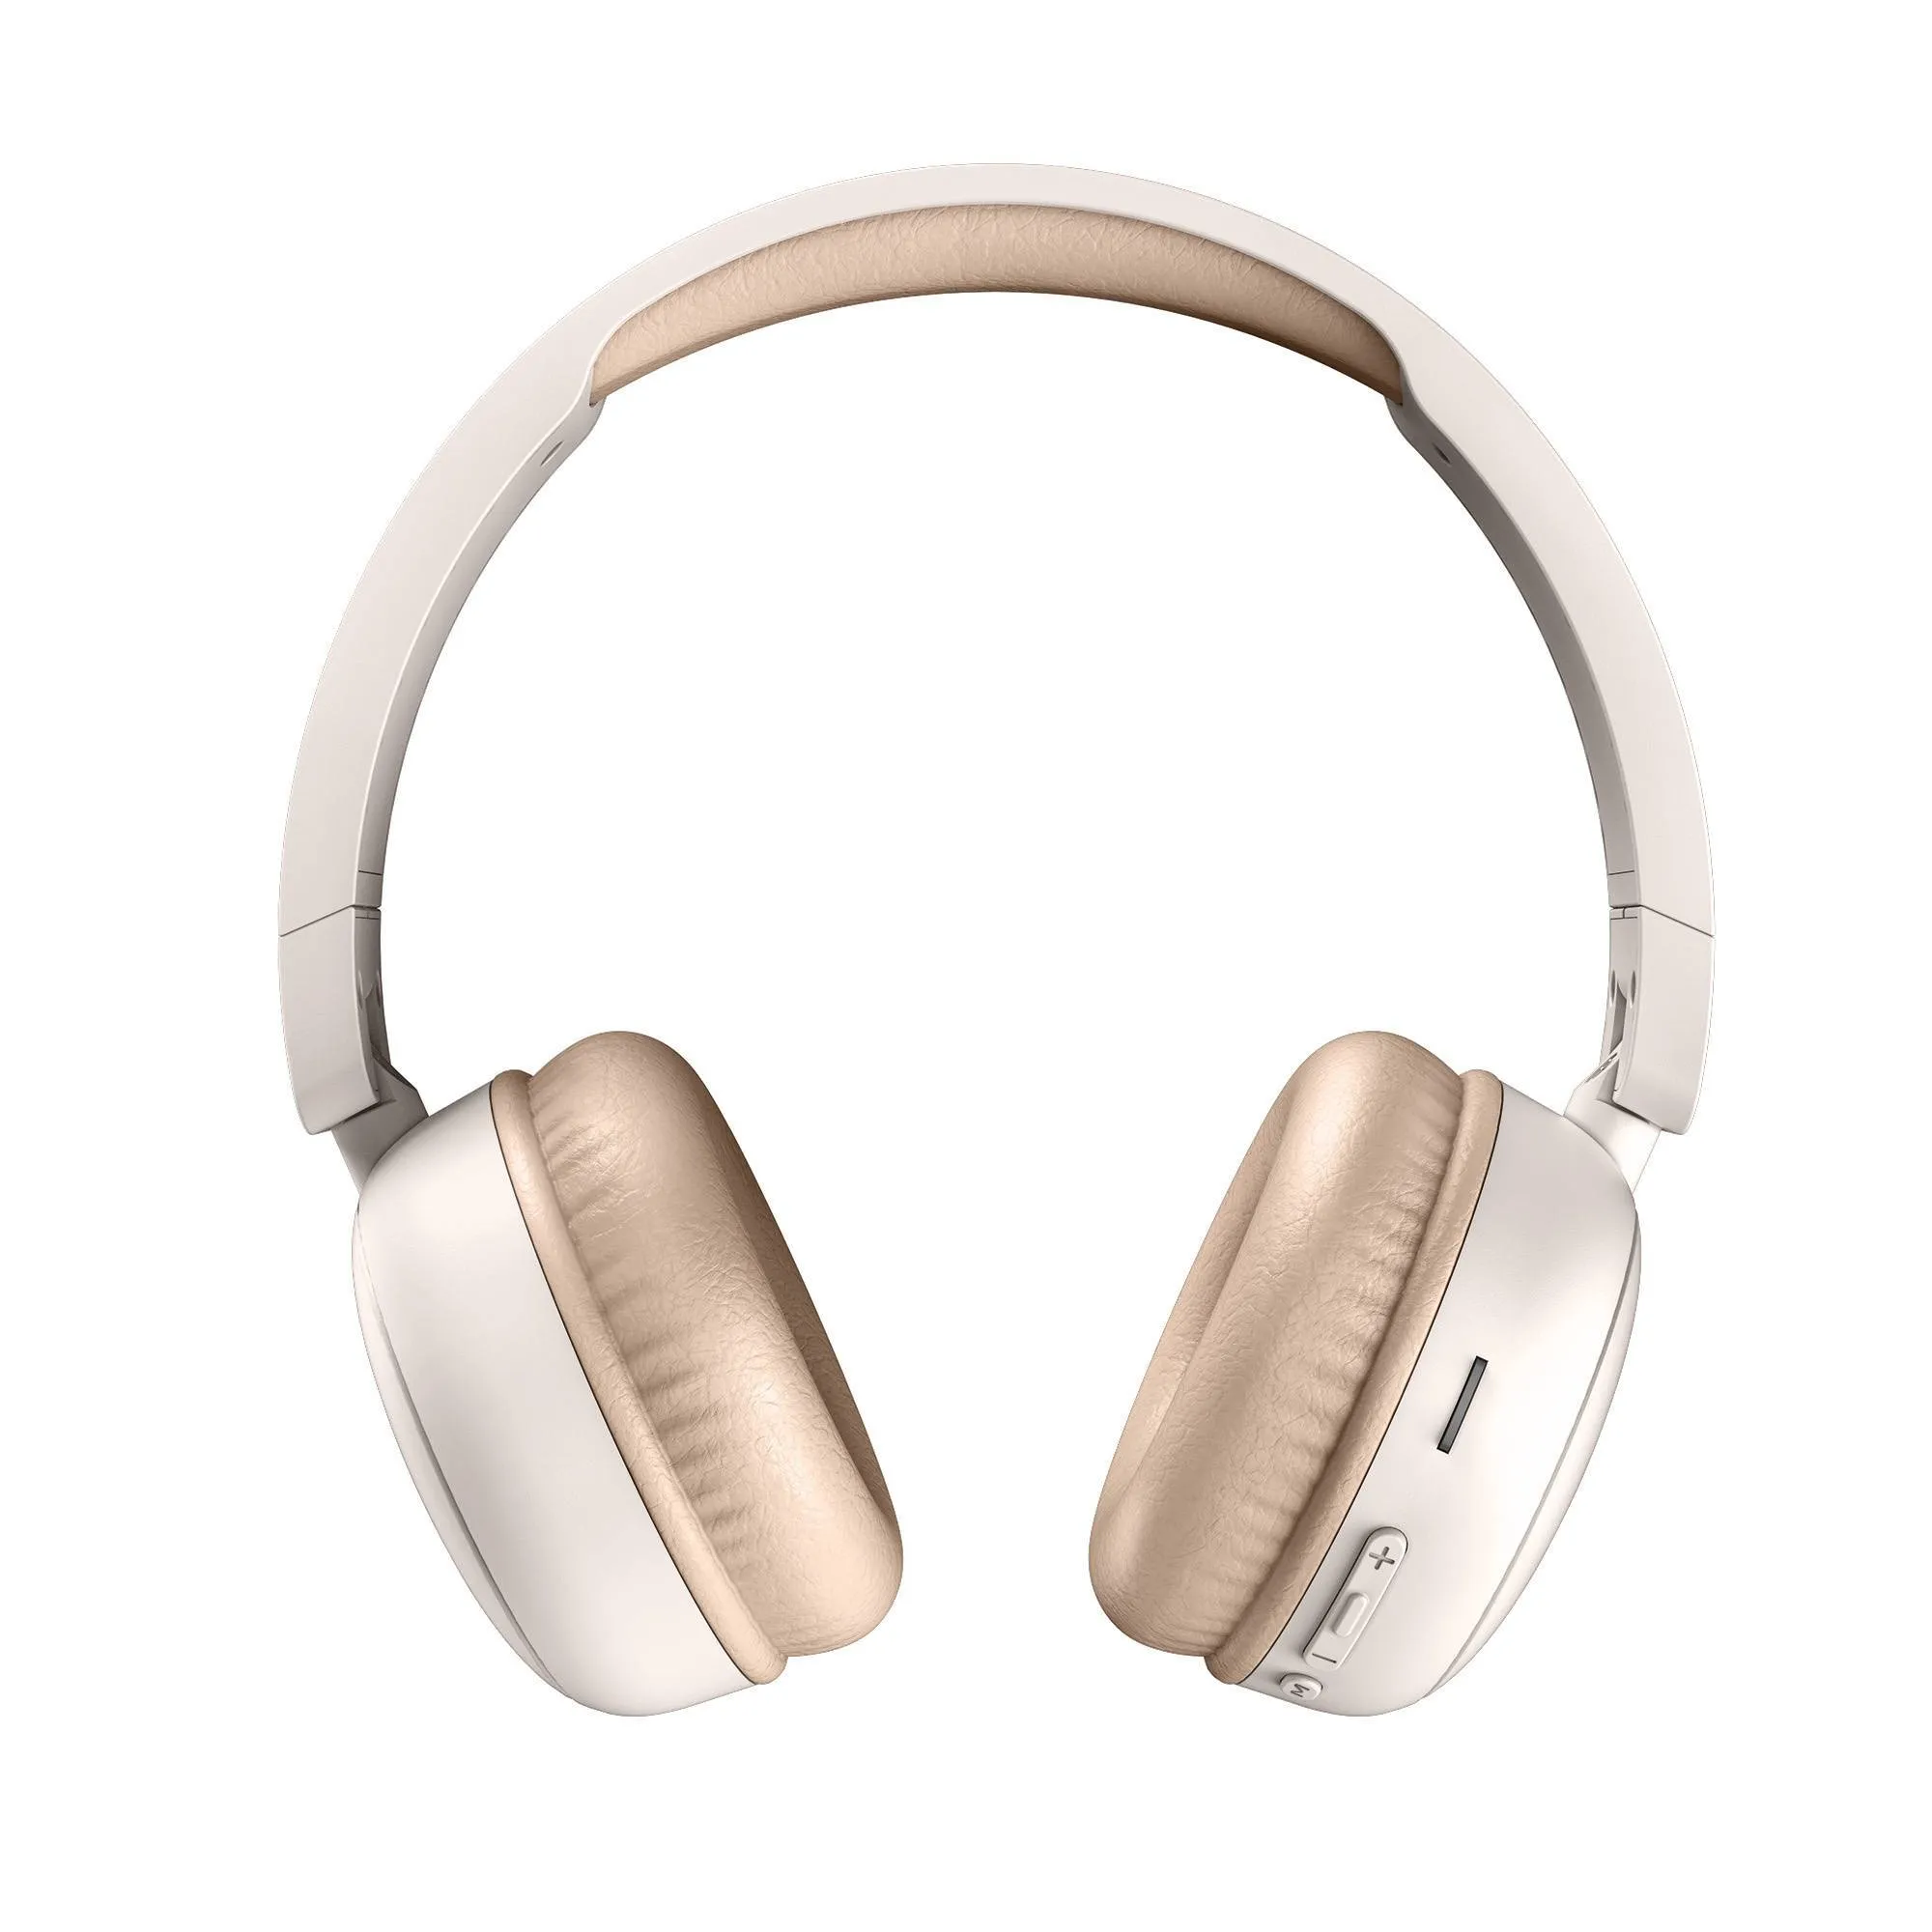 Radio Color cream headphones with multifunction buttons to answer calls and control playback without using your phone